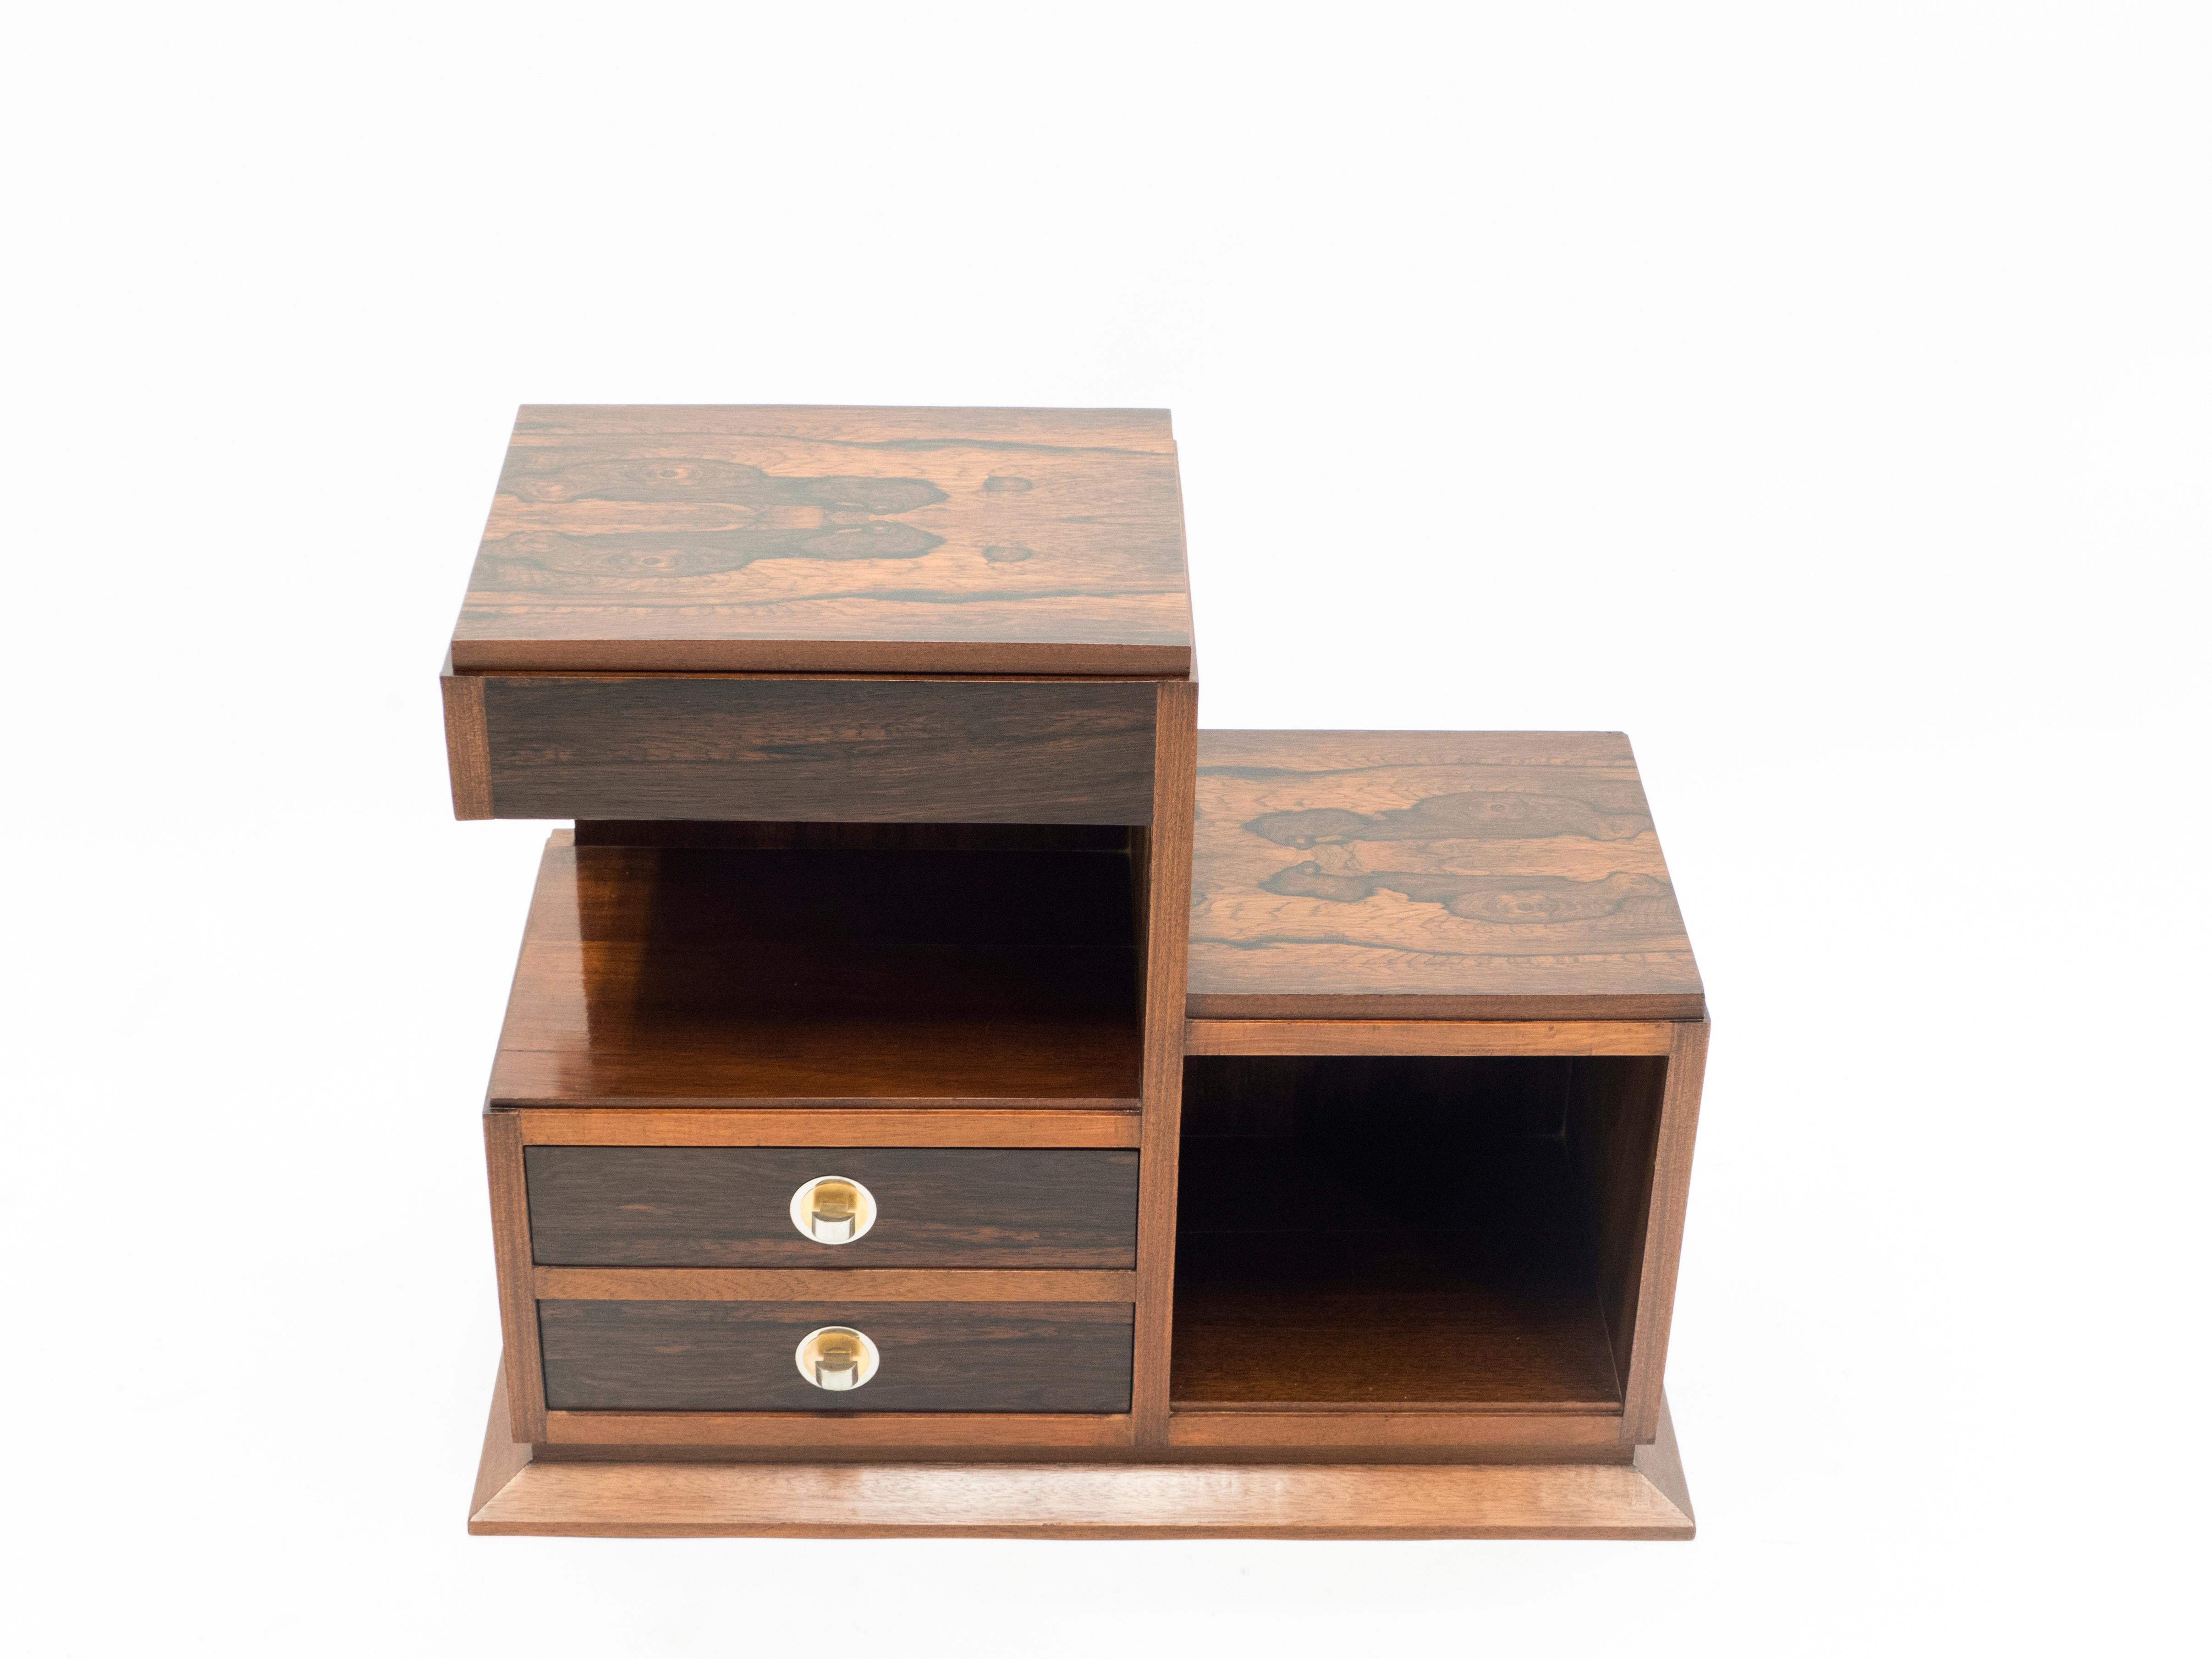 Mid-20th Century French Art Deco Modernist Rosewood Brass Sewing Cabinet, 1940s For Sale